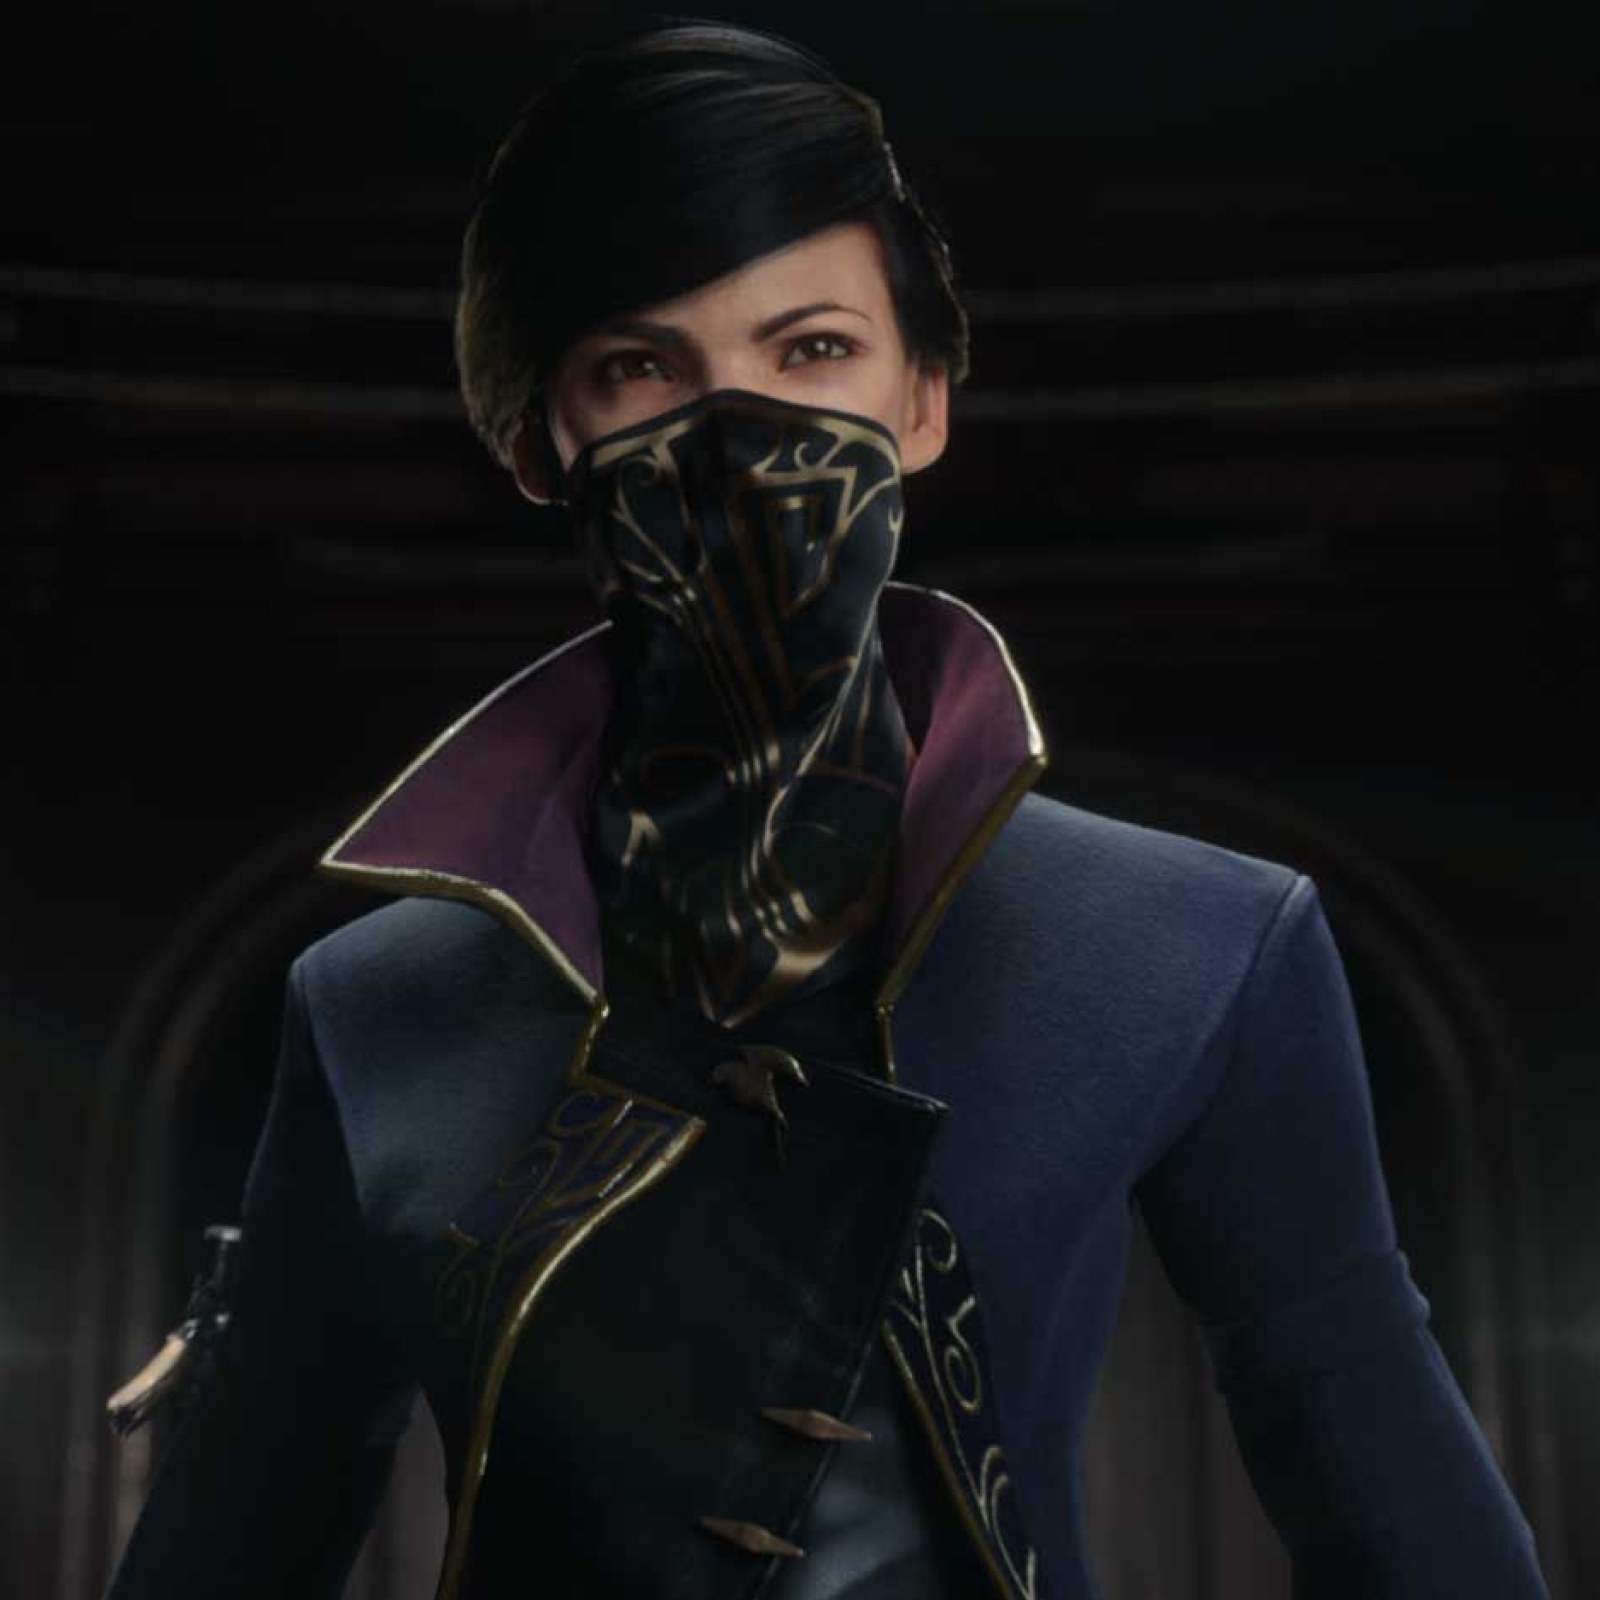 Dishonored 2 : Mission 8 Safe Code Location (Marletto's Apartment